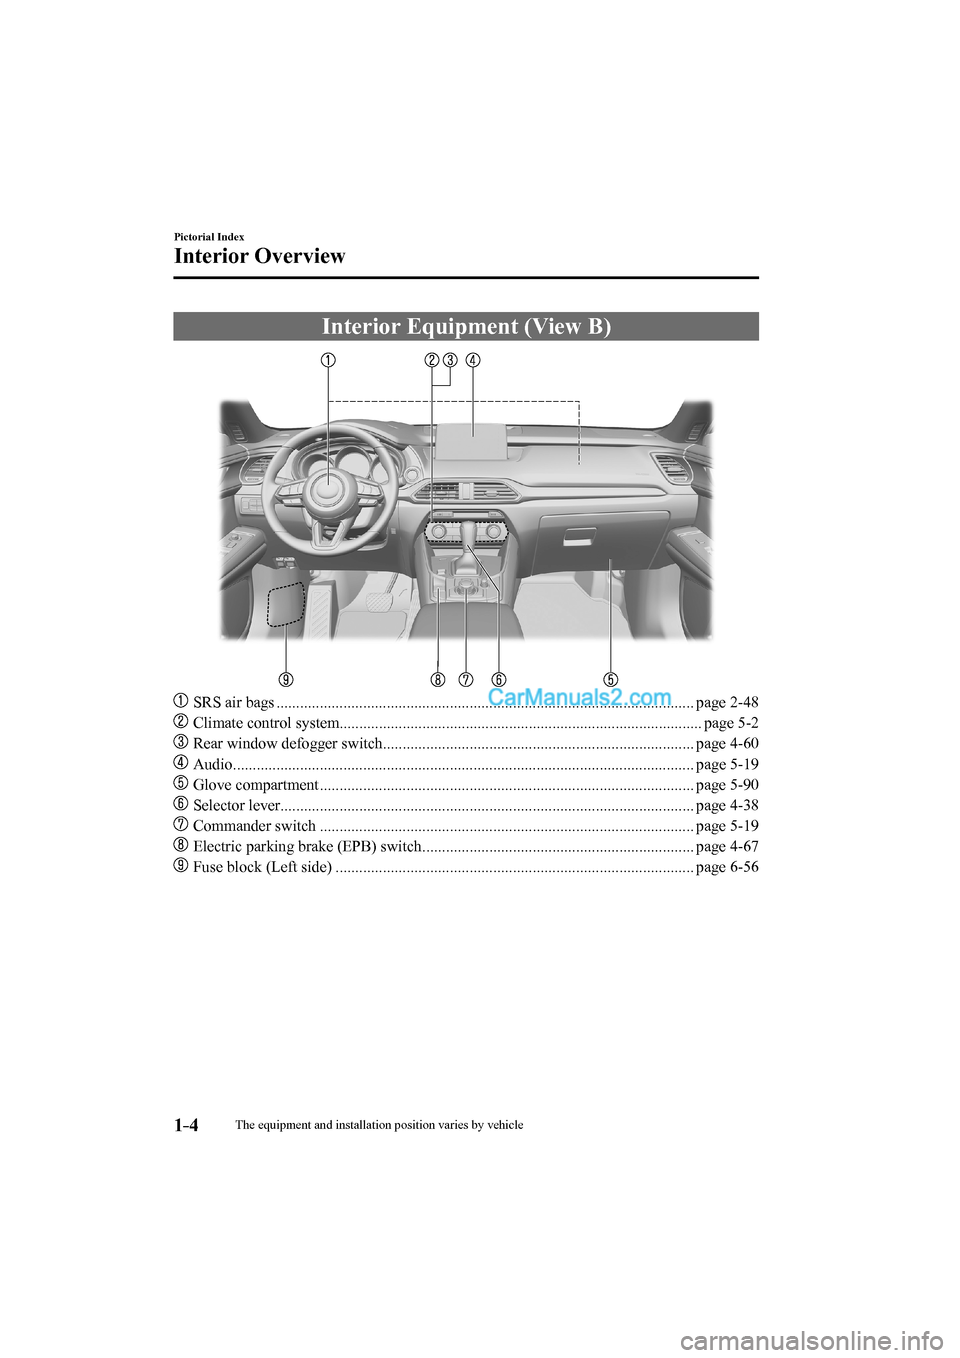 MAZDA MODEL CX-9 2017  Owners Manual (in English) 1–4
Pictorial Index
Interior Overview
 Interior Equipment (View B)
    
���
  SRS air bags ........................................................................................................